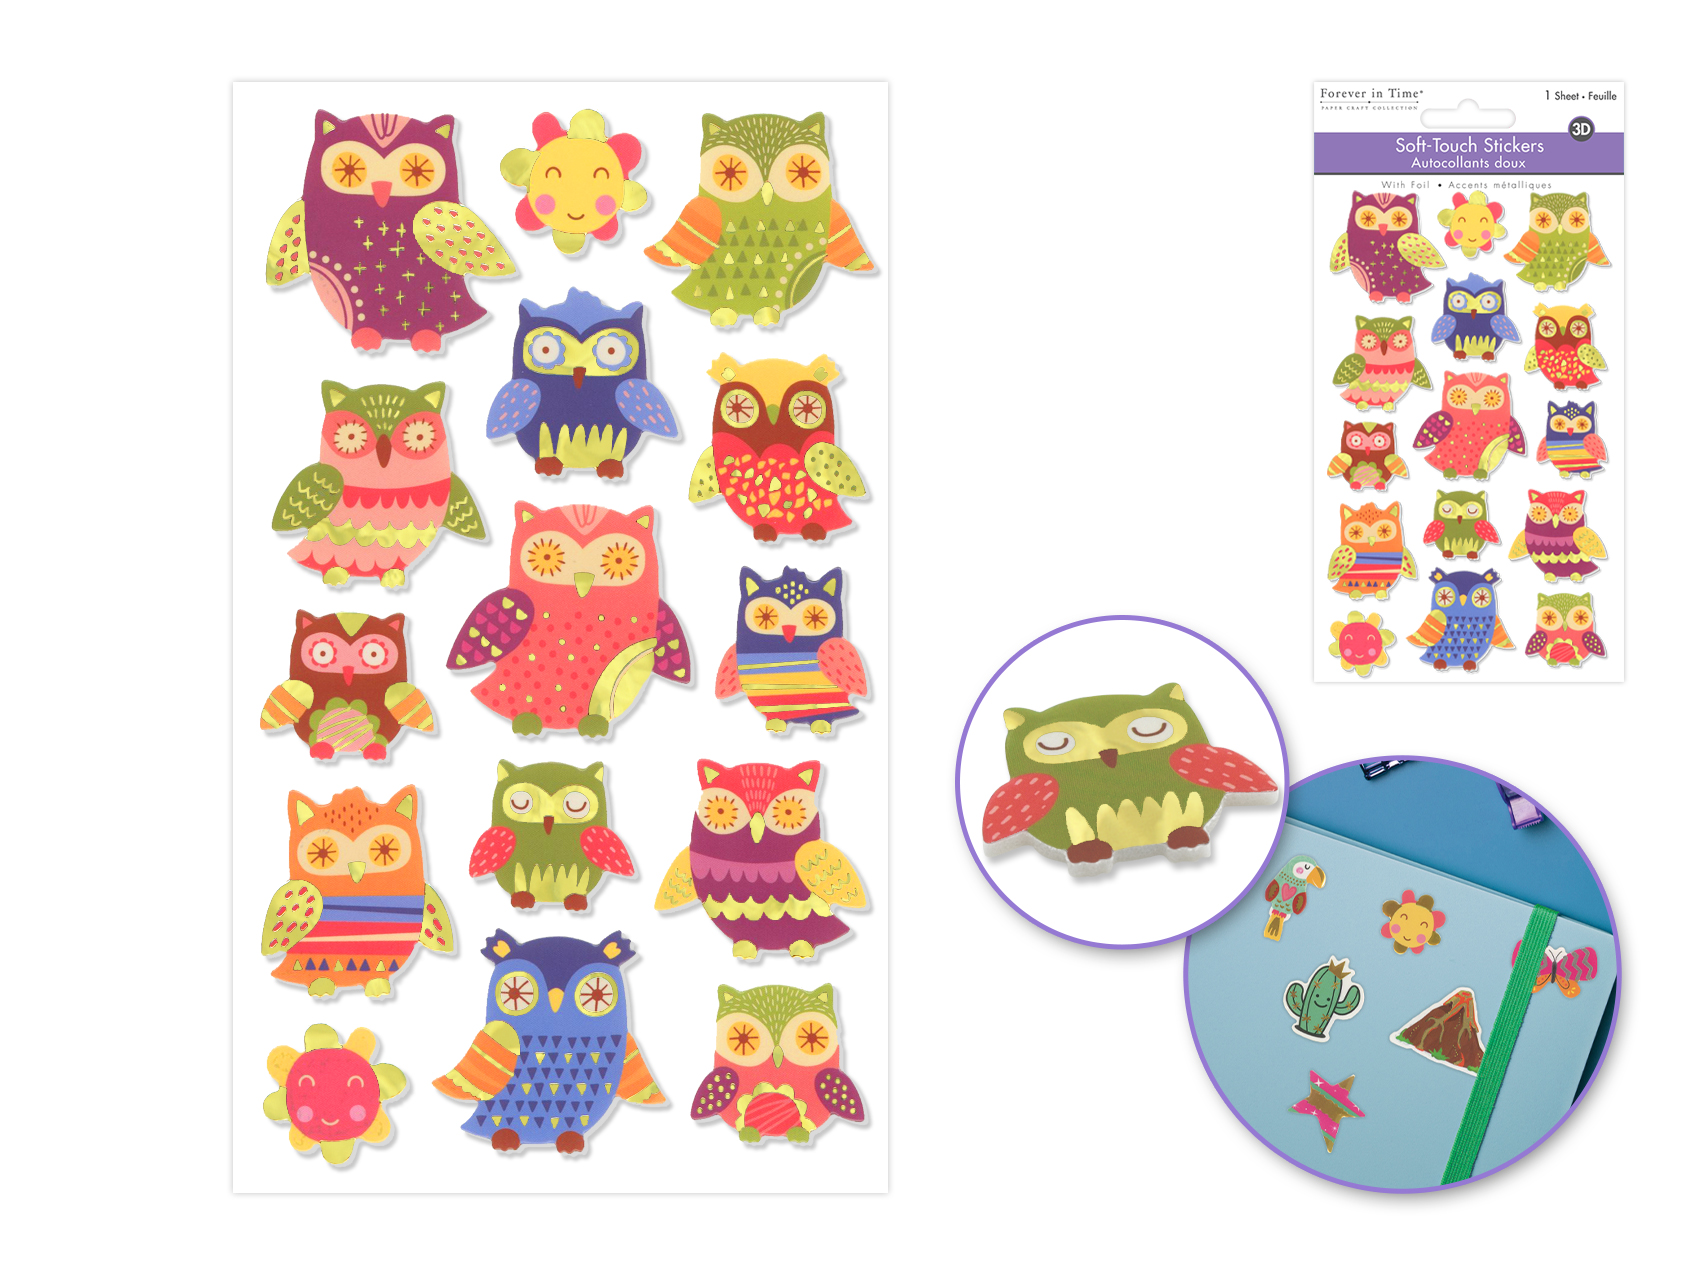 Forever In Time 3D Soft-Touch Stickers w/Foil - Owl